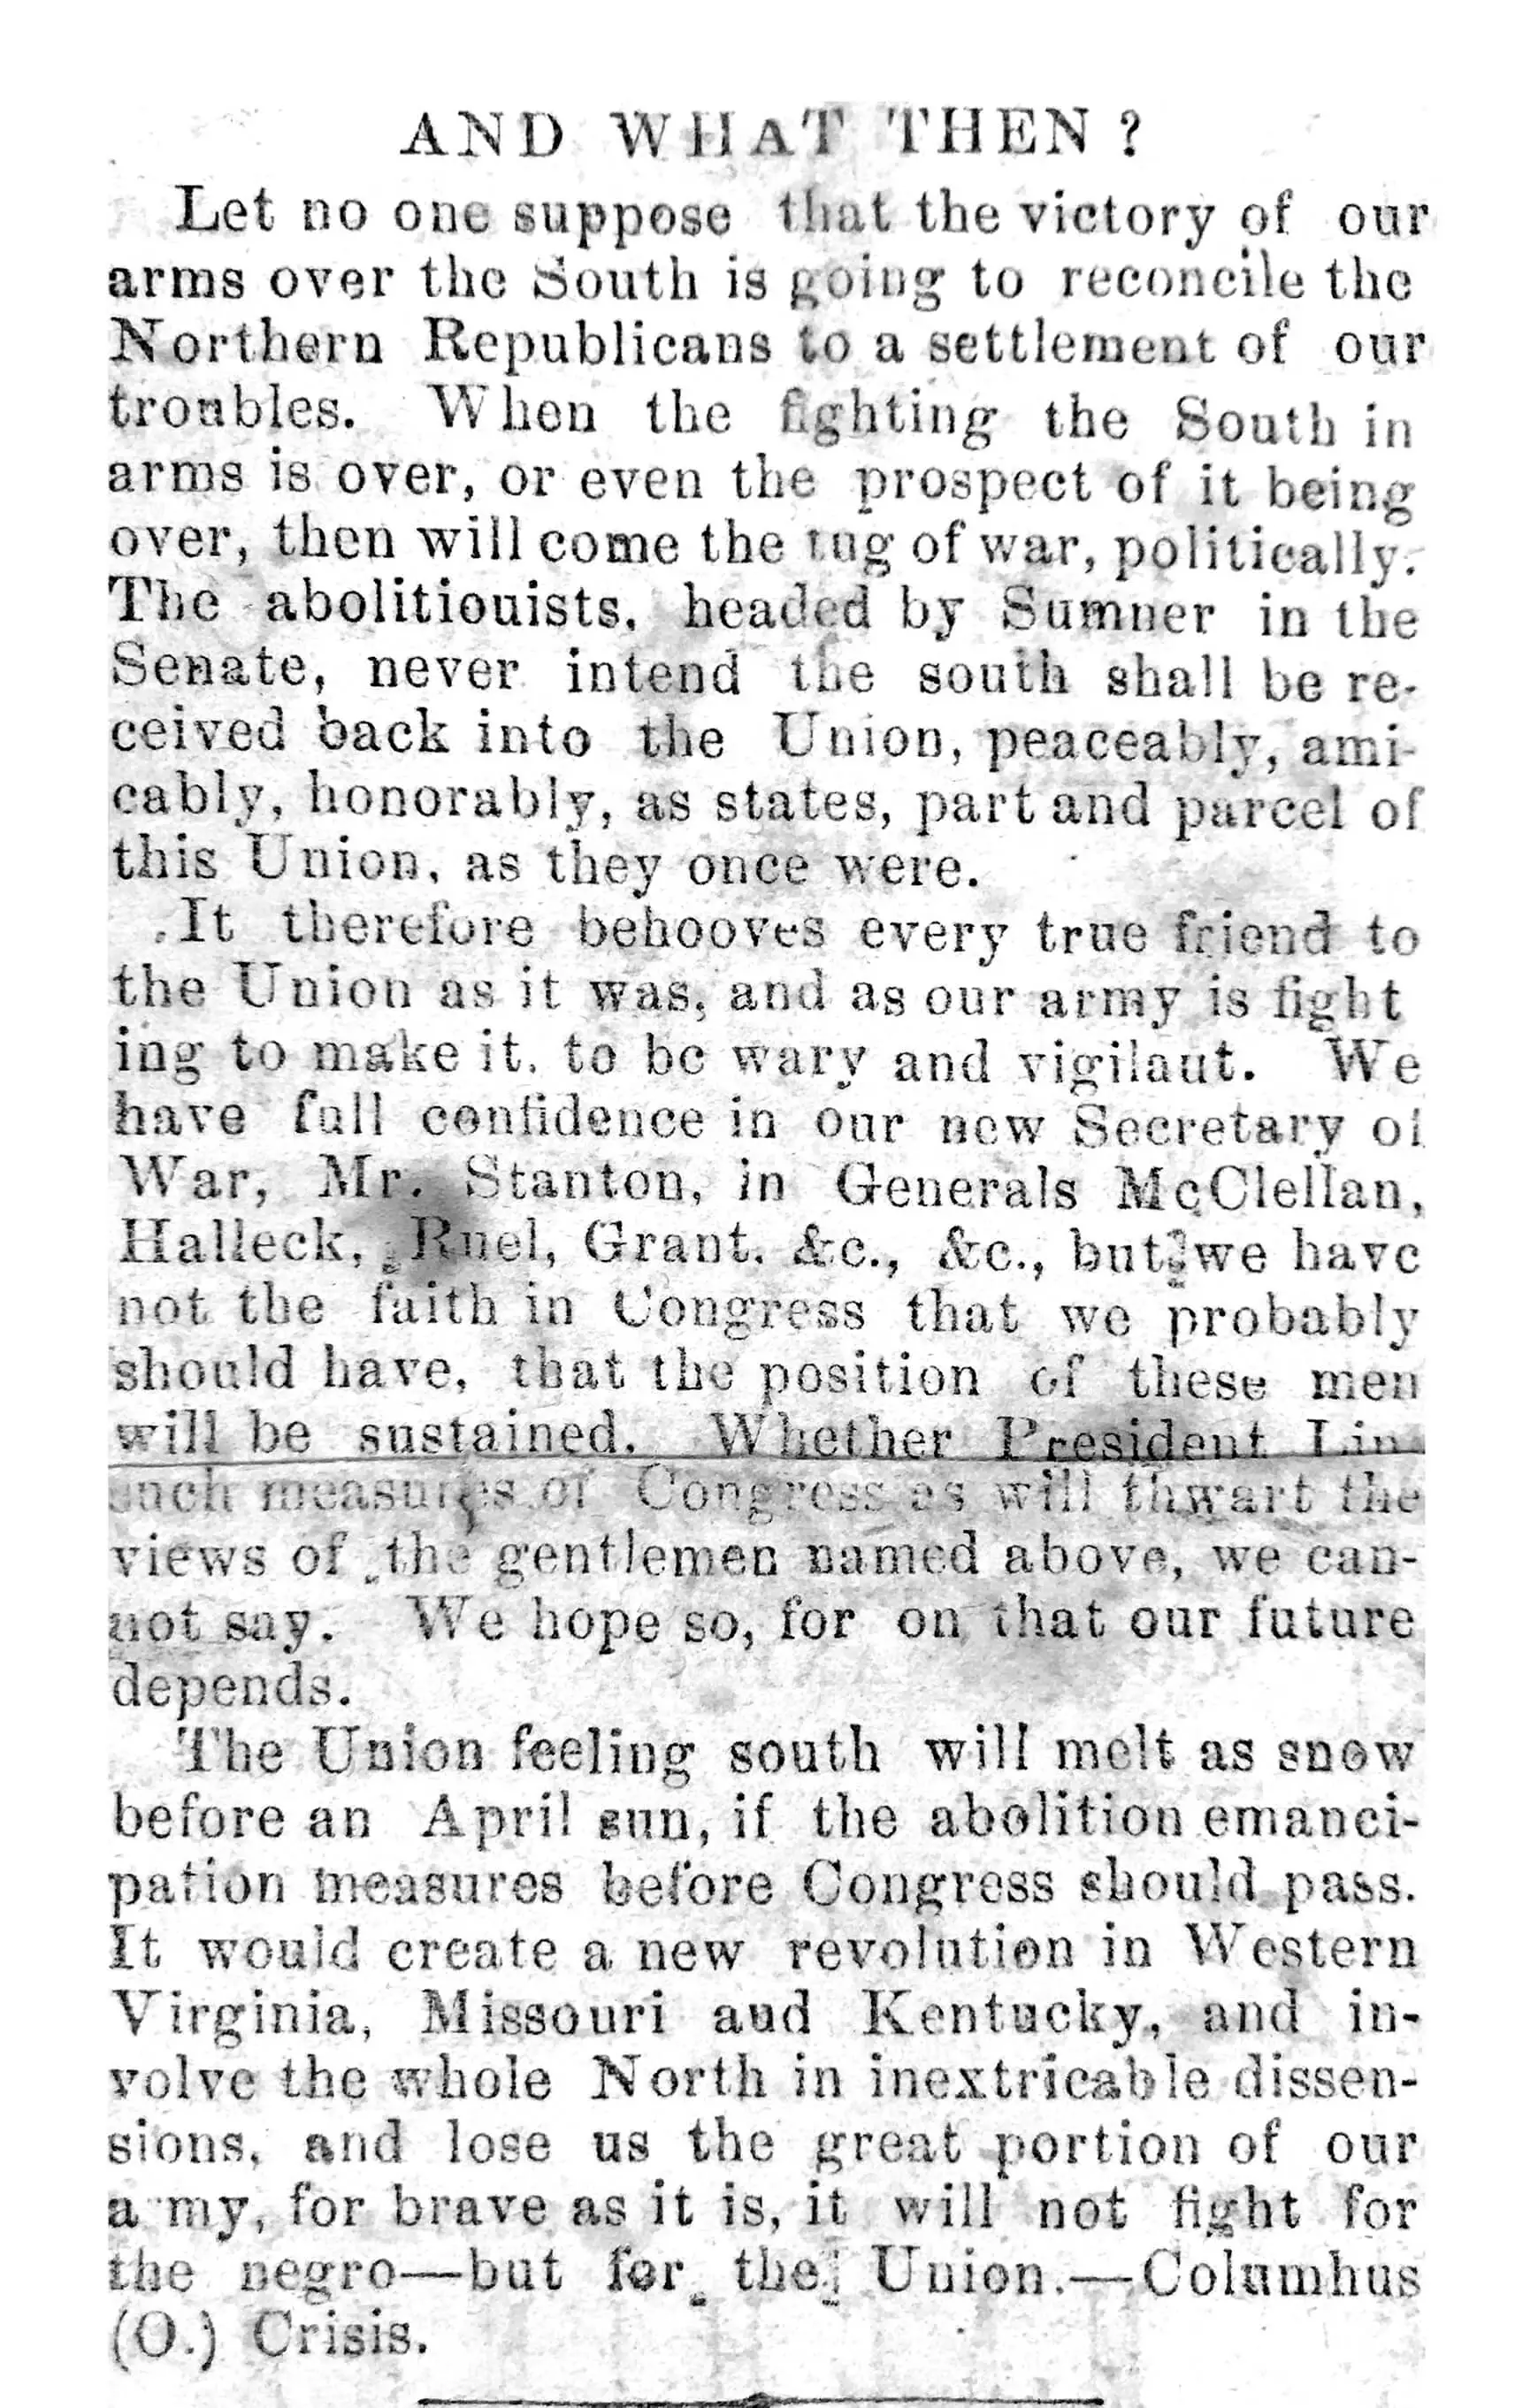 This article describes the aftermath of the Civil War, and its effects on the Republican Party moving forward. The first paragraph states: let no one supposed that the victory of our arms over south is going to reconcile northern republicans a settlement troubles. when fighting in over, or even prospect it being then will come tug war, politically. abolitionists, headed by sumner senate, never intent shall be received back into union, peacably, amicably, honorably, as states, part and parcel this they once were.